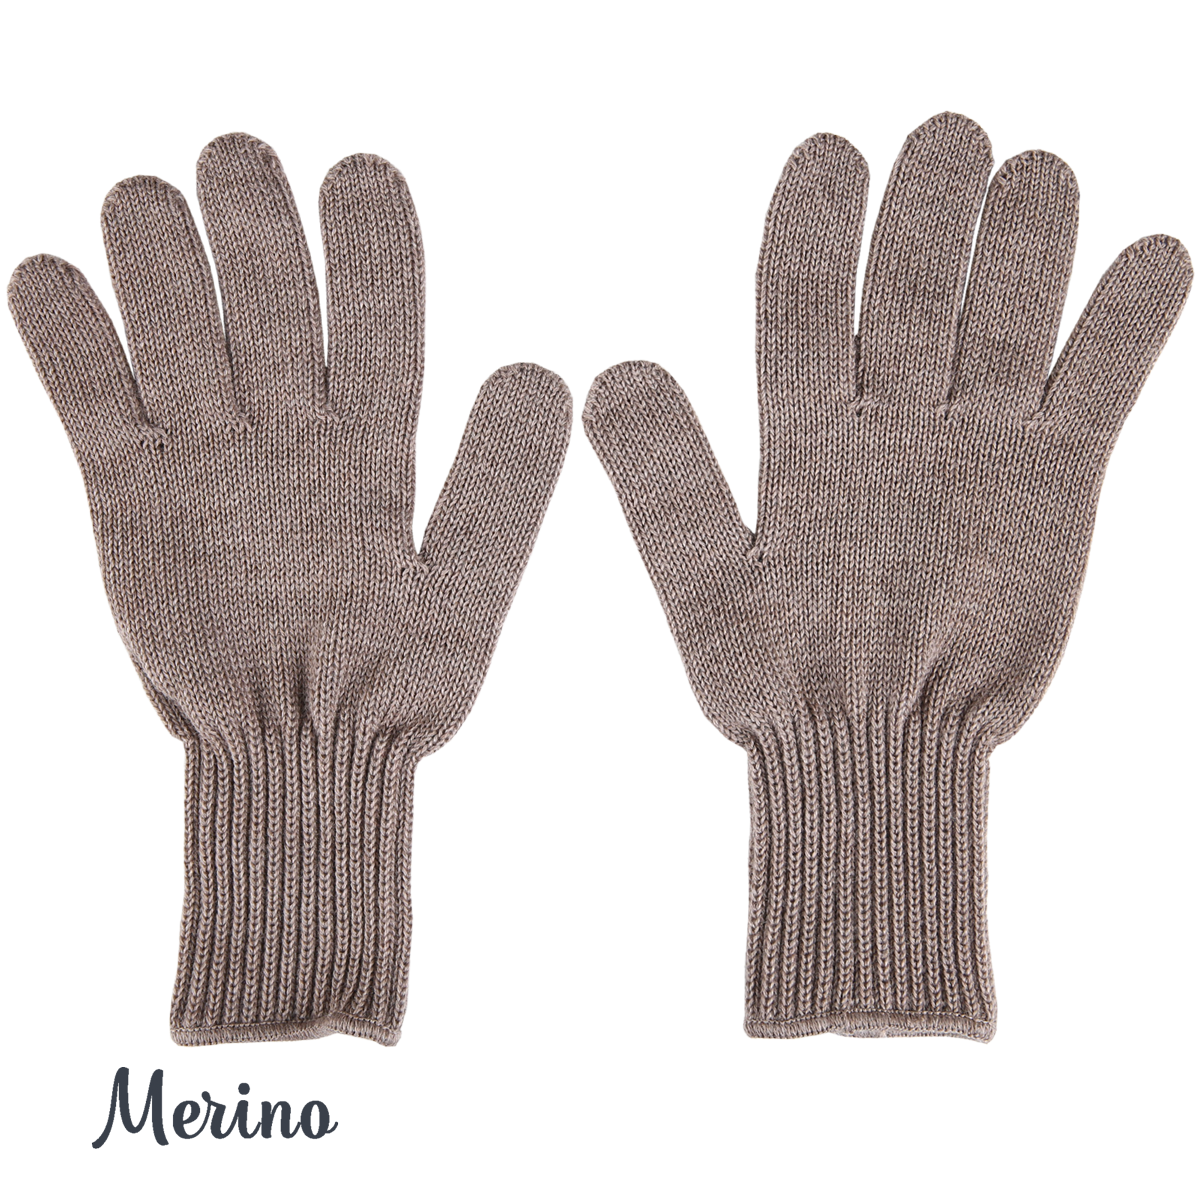 Merino wool gloves for adults